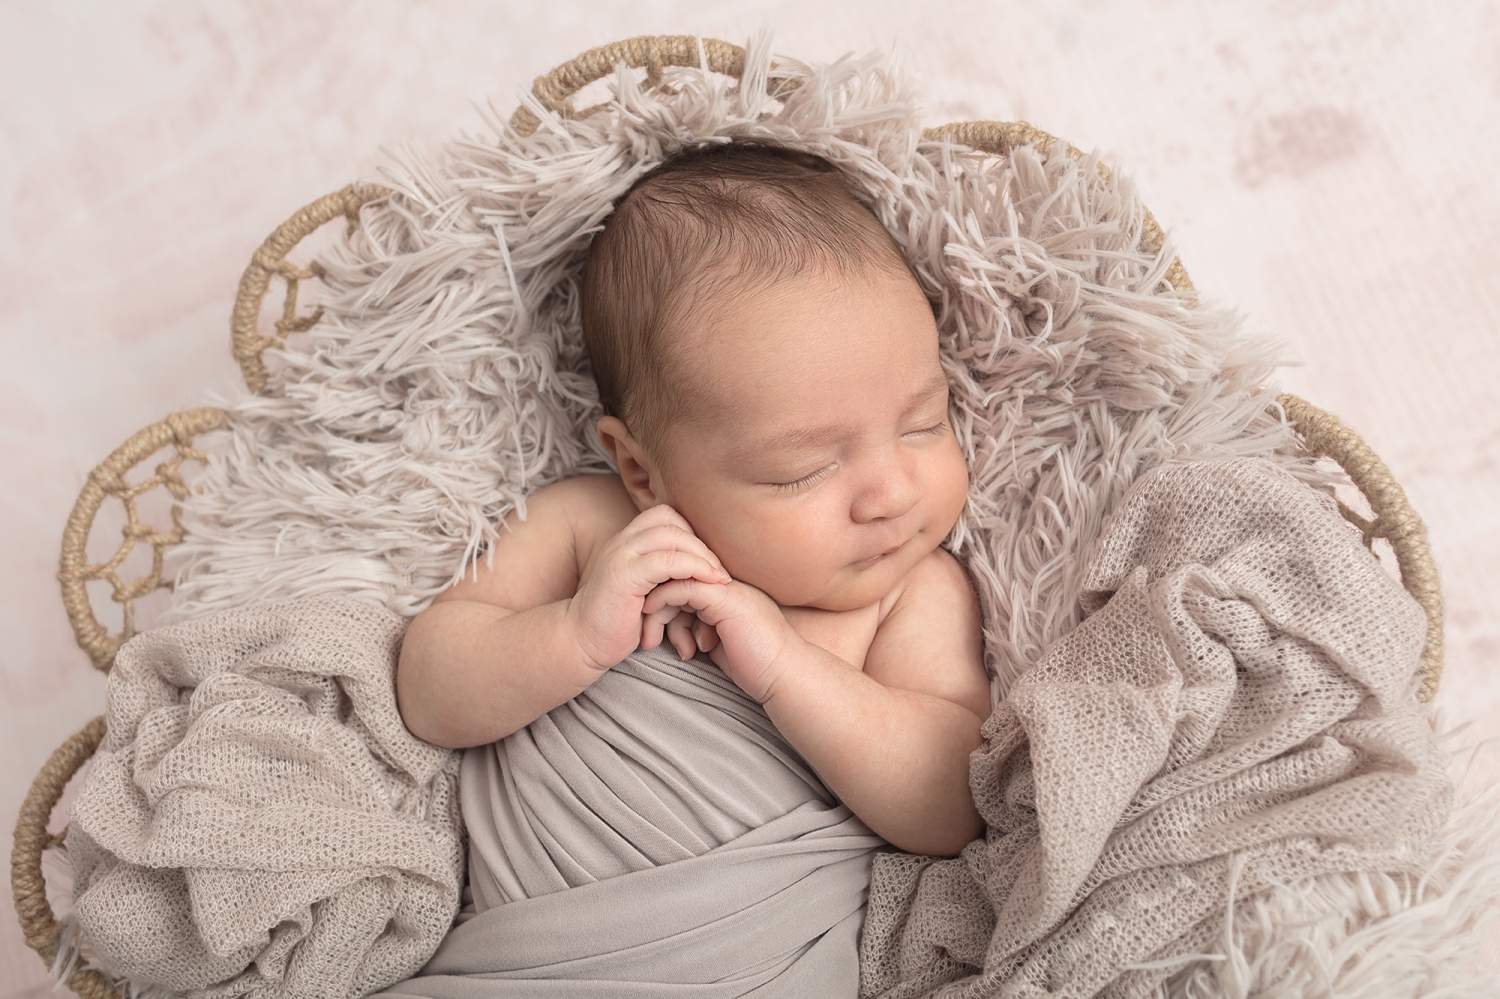 newborn wrapped in taupe and placed on an open knit blanket on top of a taupe colored flokati in a basket, baby clasping hands together